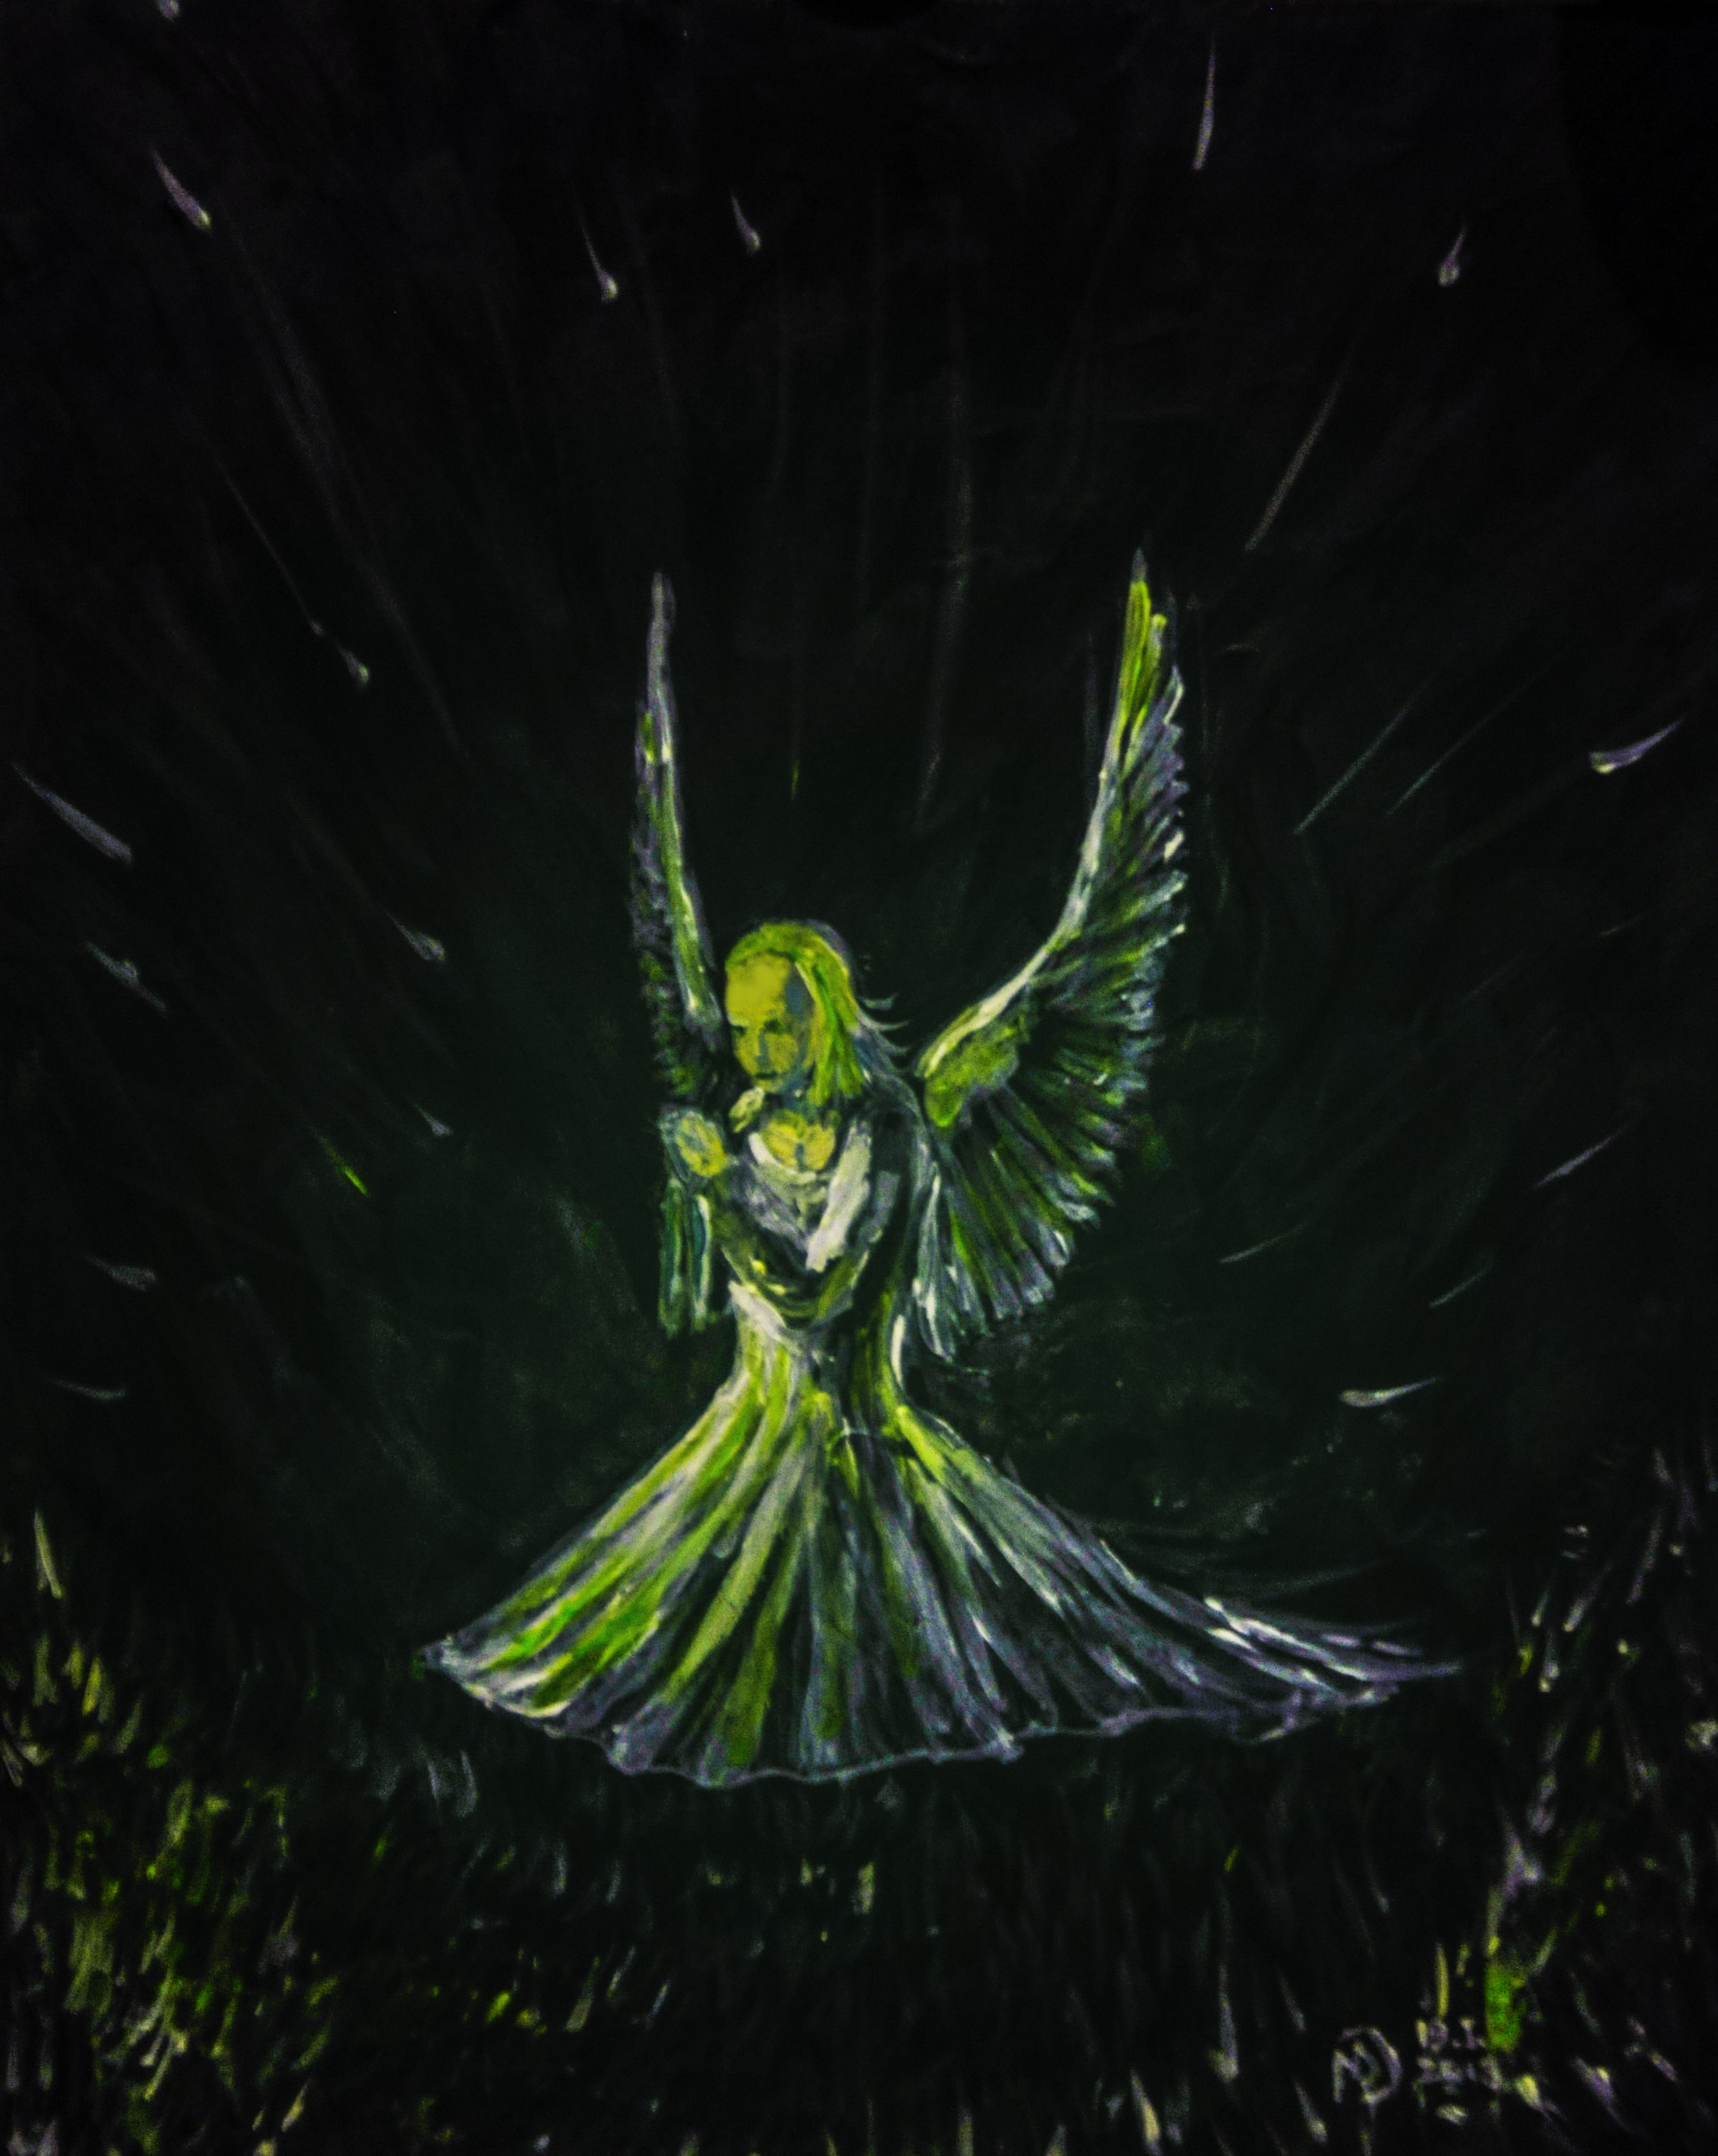 Angel praying on the grass in the night